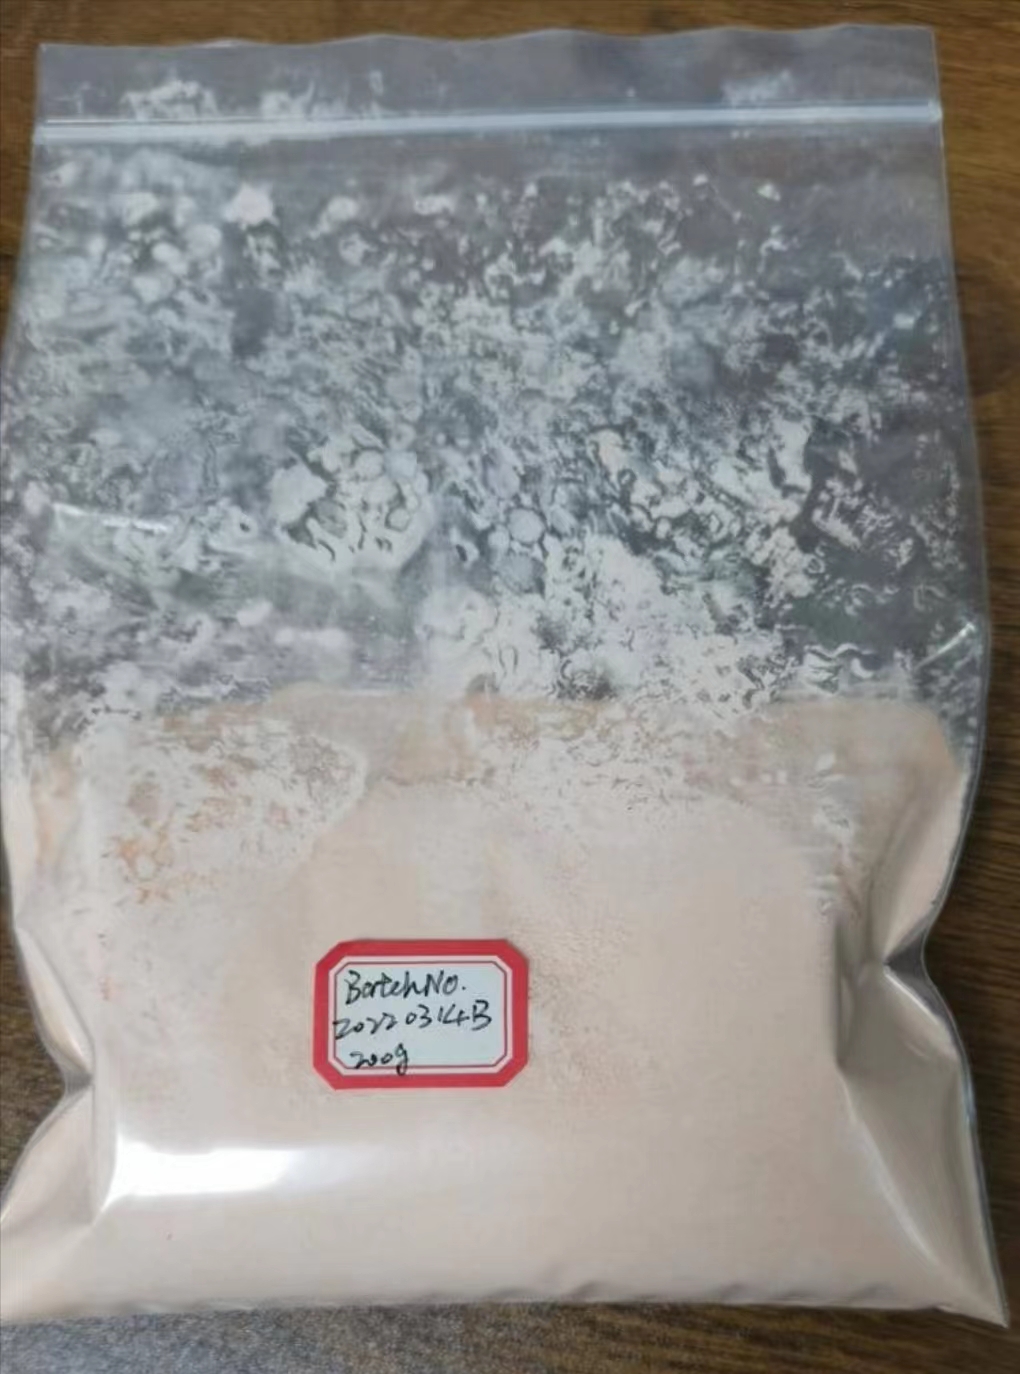 Supply 99% Bromazolam Manufacturer CAS#71368-80-4 with Cheaper Price And Safe Delivery 